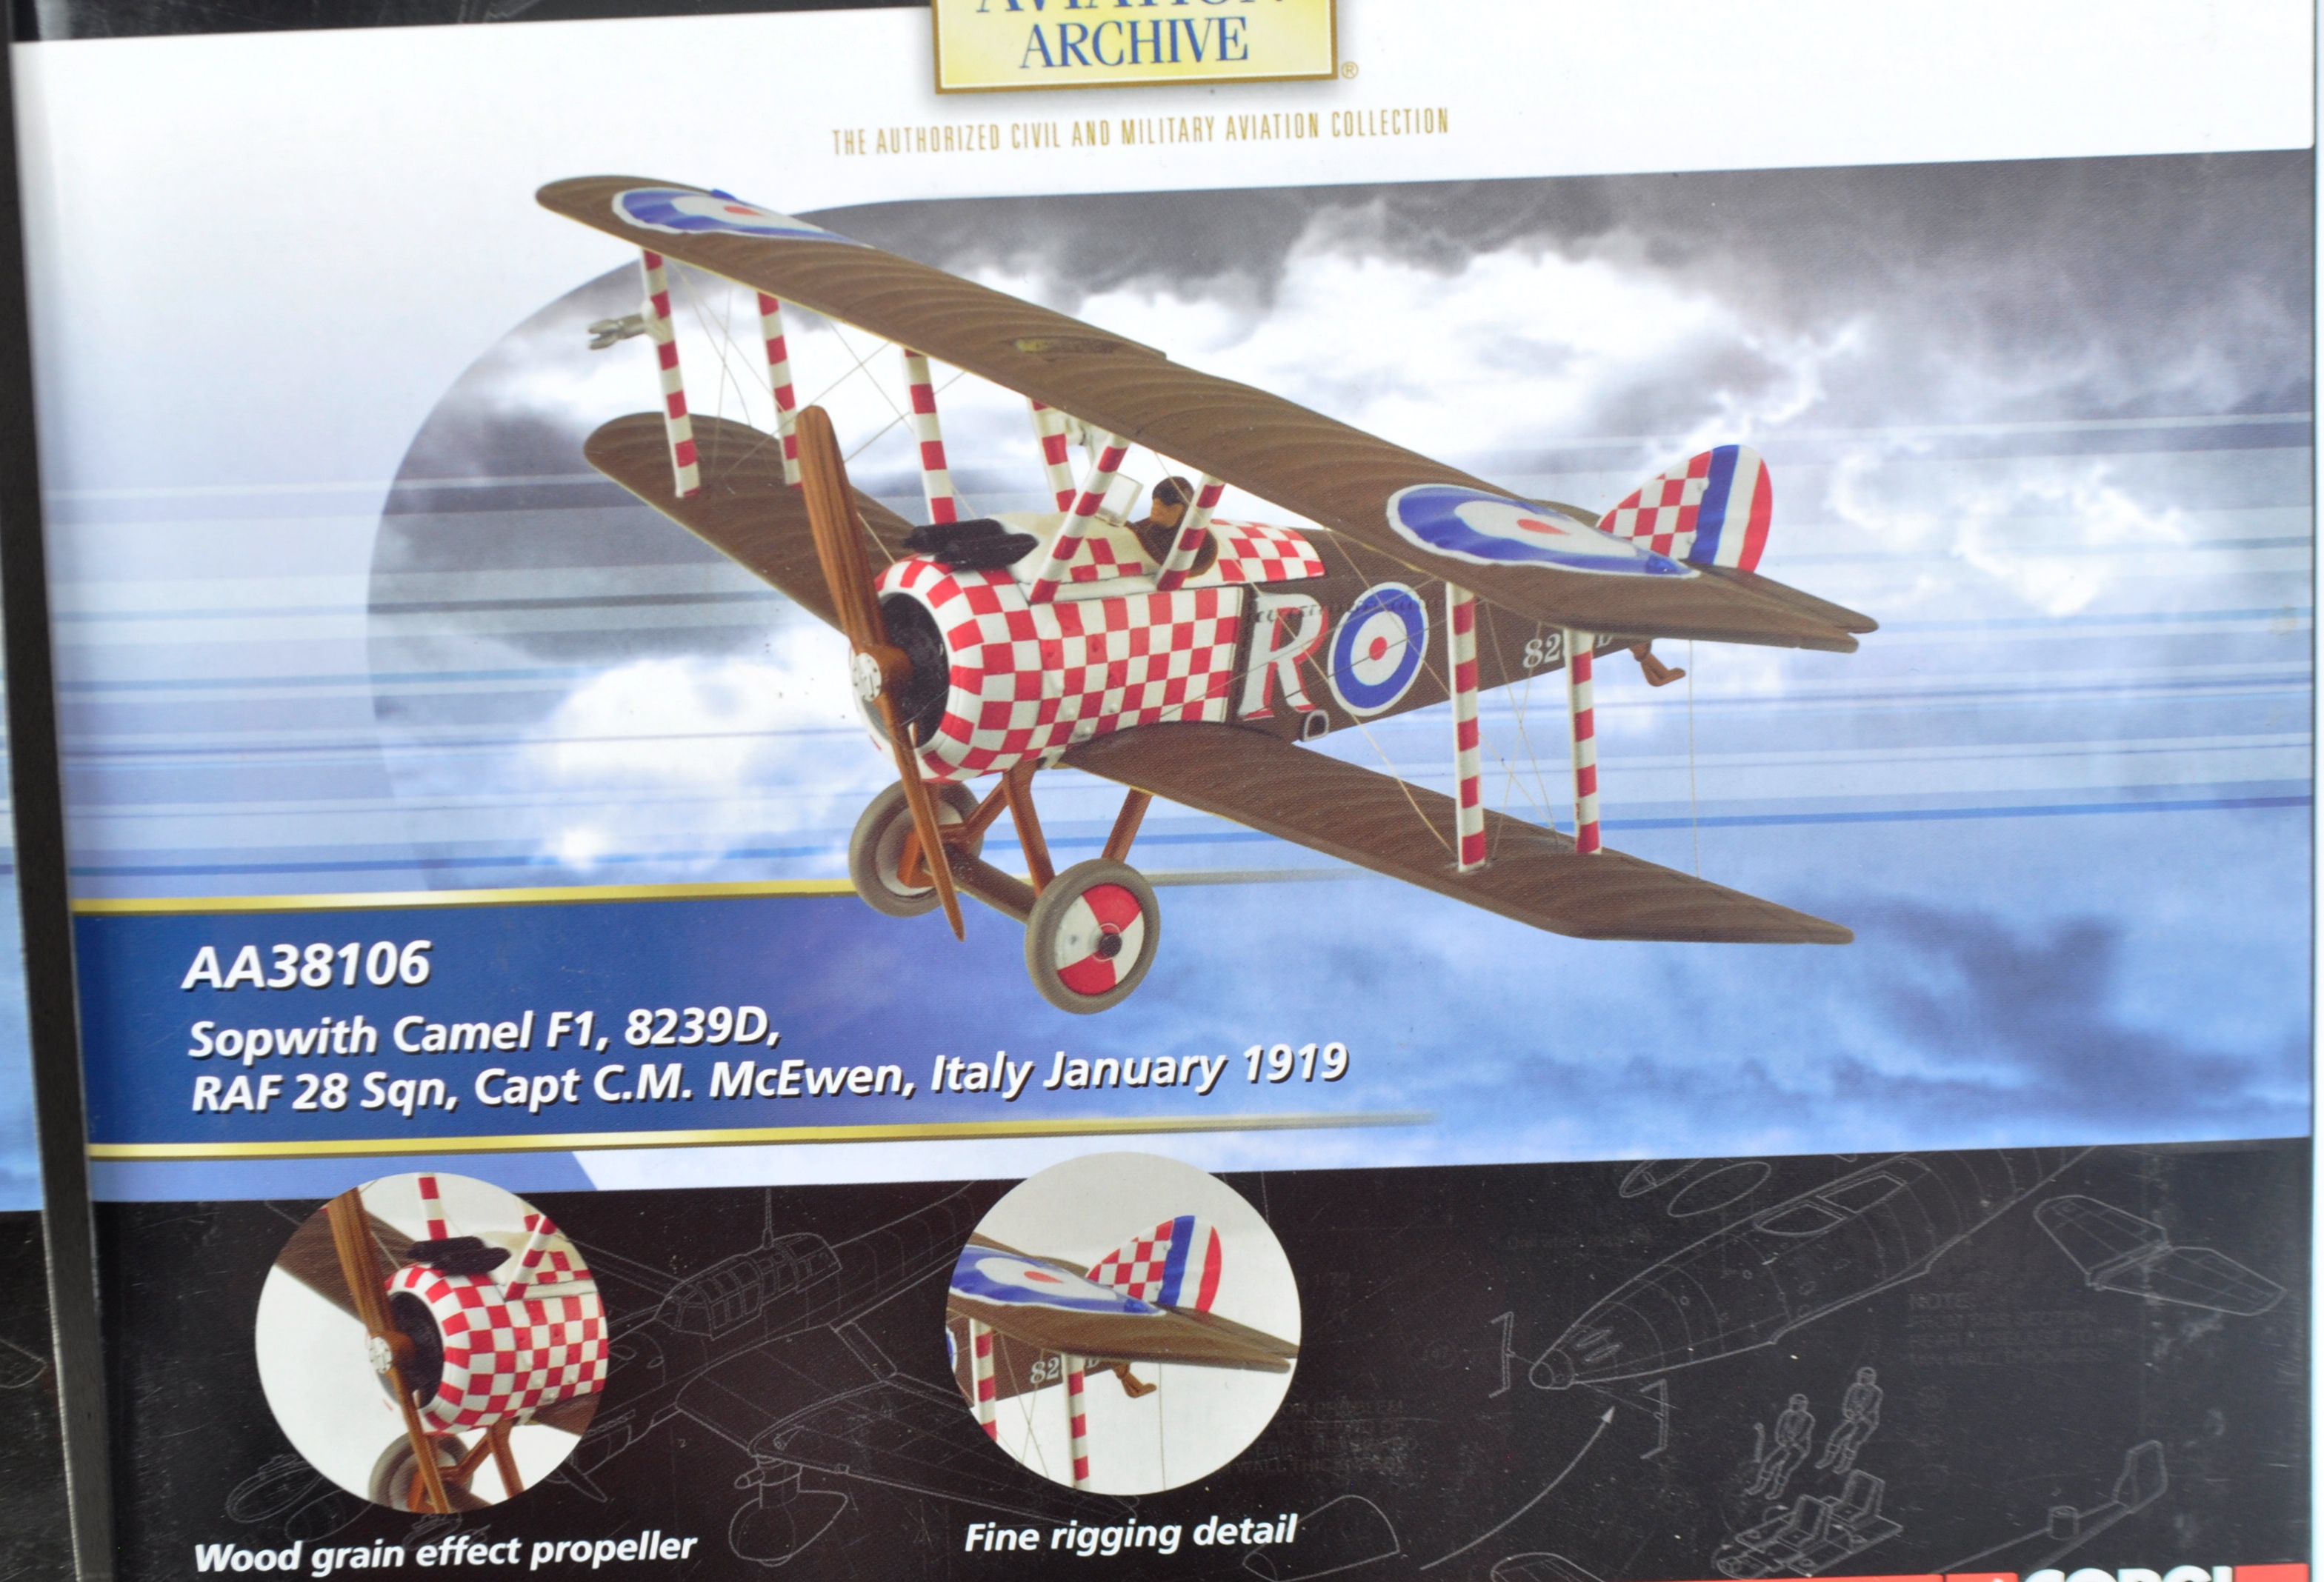 CORGI AVIATION ARCHIVE - TWO BOXED LIMITED EDITION 1/48 SCALE - Image 4 of 6